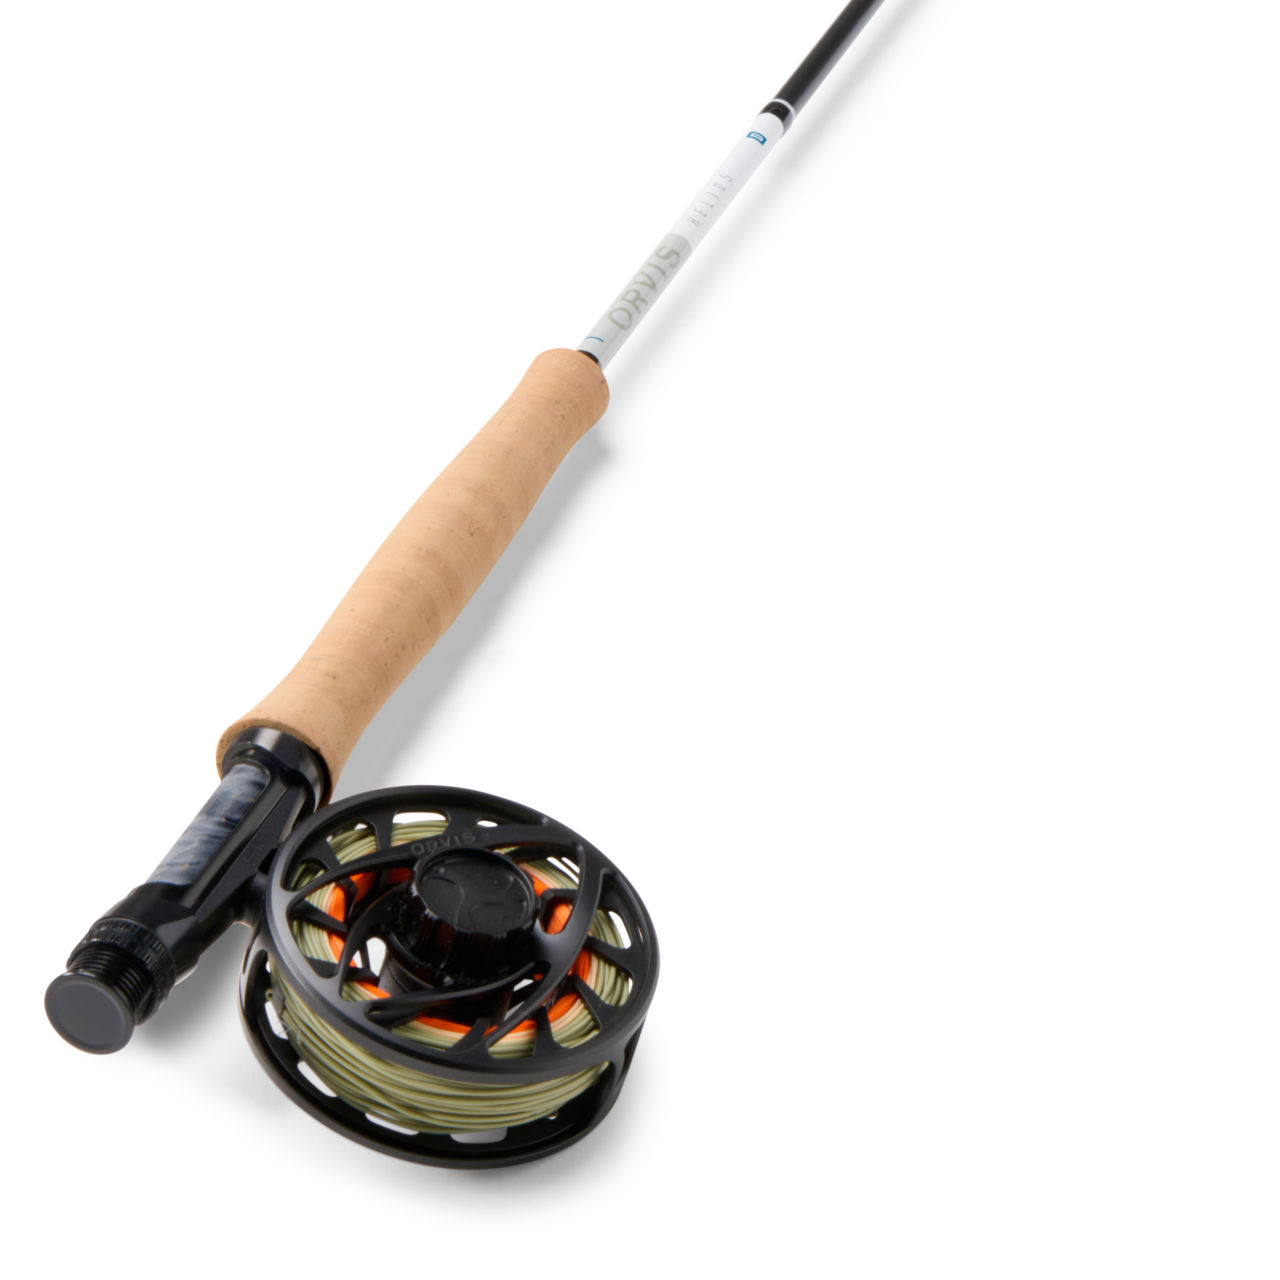 Helios D 10' 5-weight Fly Rod Outfit | Black | Size 5-weight . 10' | Graphite | Orvis